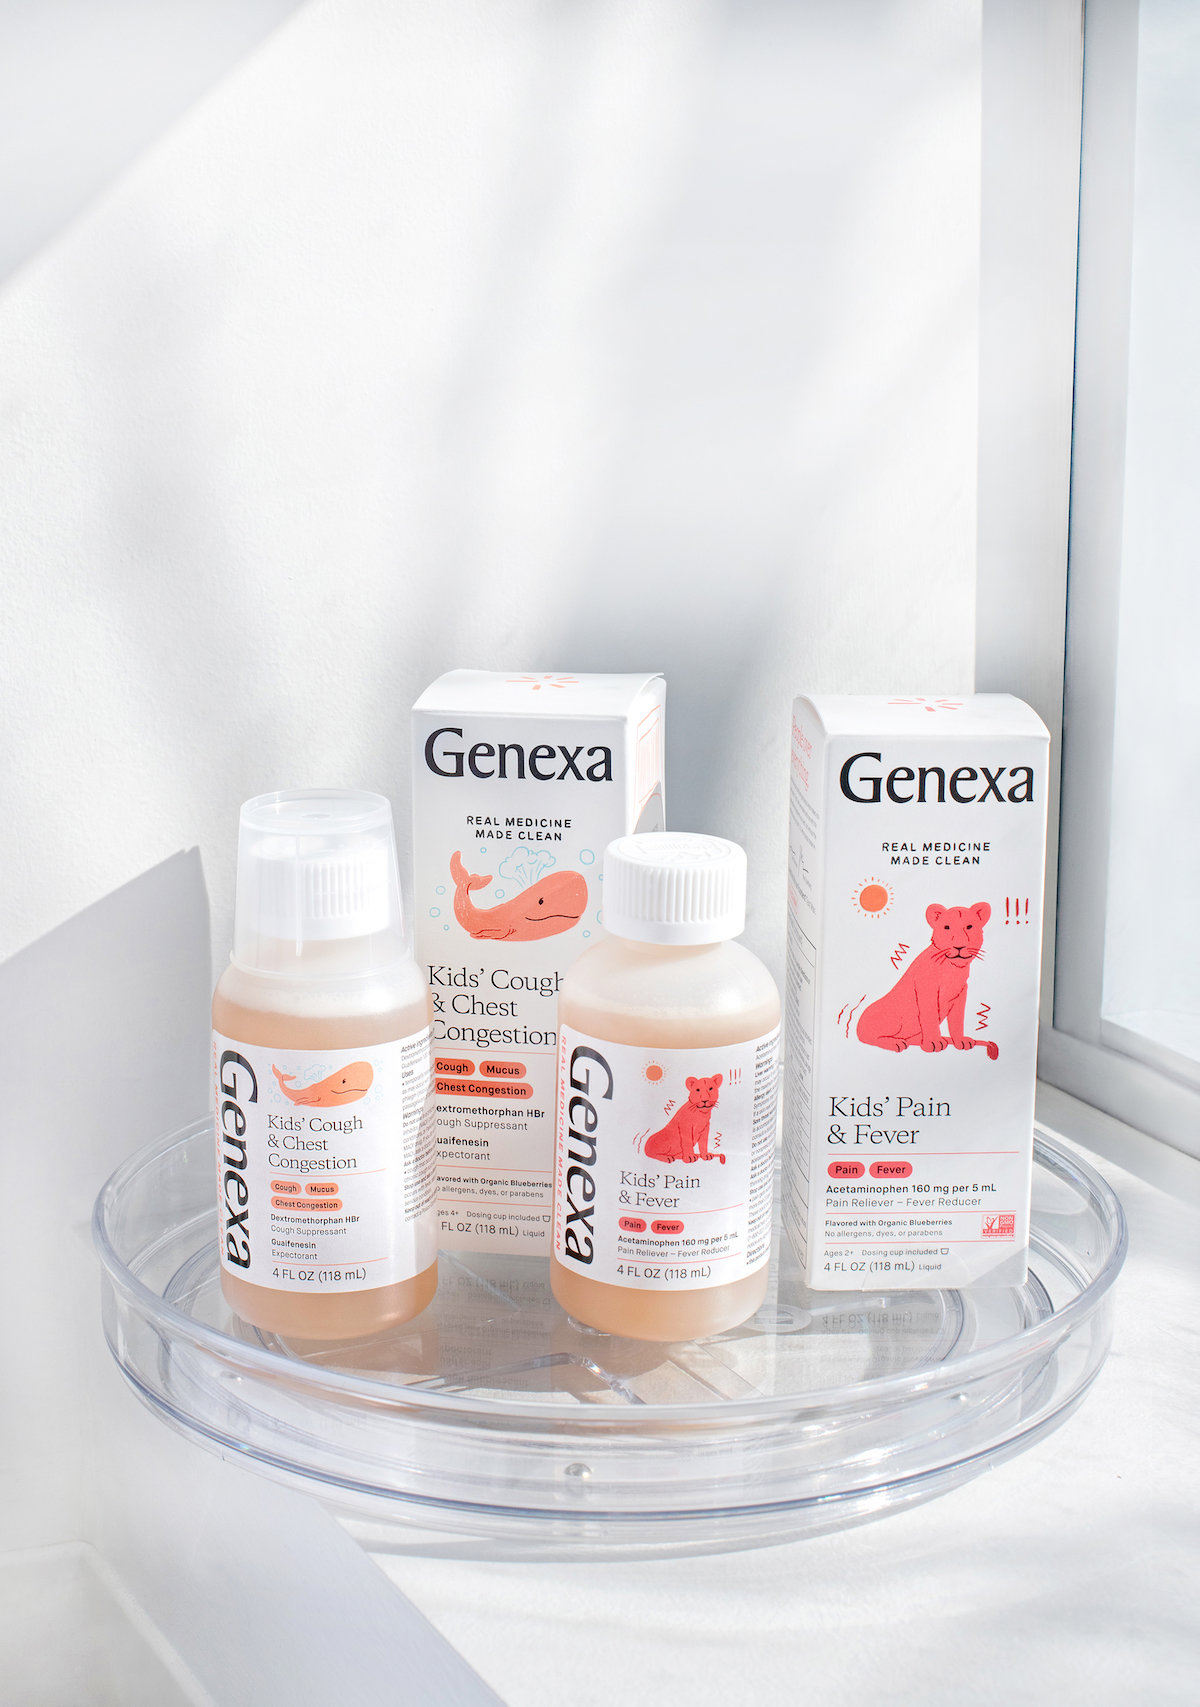 Genexa: Amazing Clean Medicine Options Without Compromise